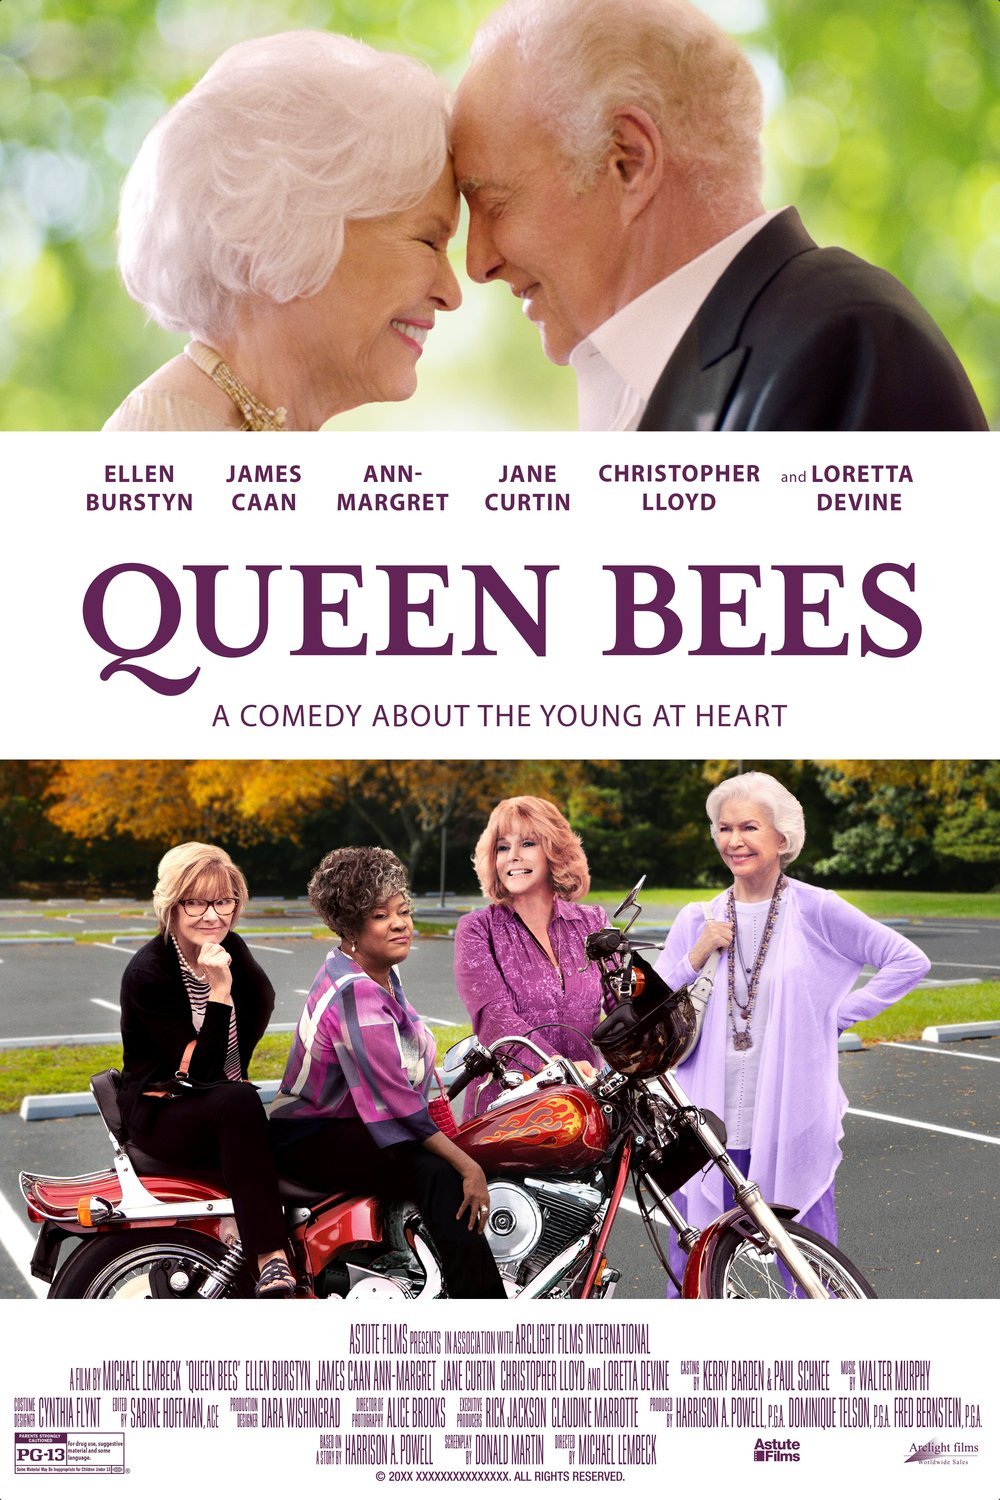 Poster of the movie Queen Bees